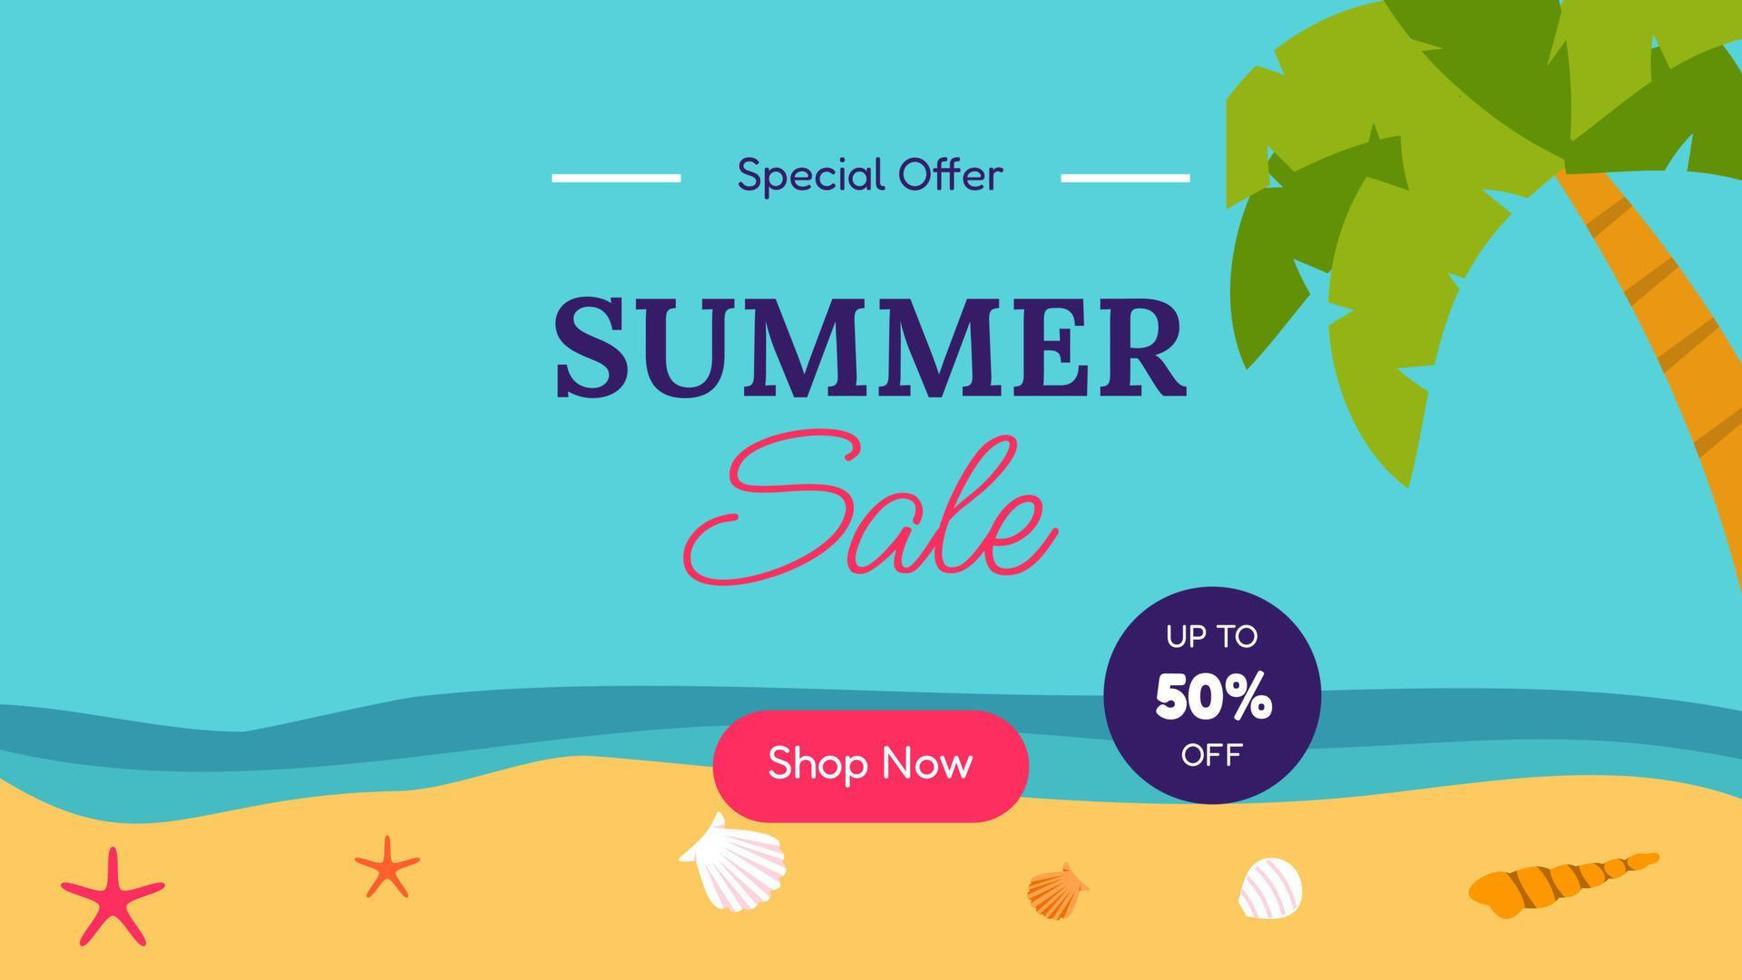 Summer sale banner in trendy style with beach, palm tree tropical leaves for promotion of cosmetic, fashion, accessories etc. Modern summer sale banner template and social media. Vector illustration.